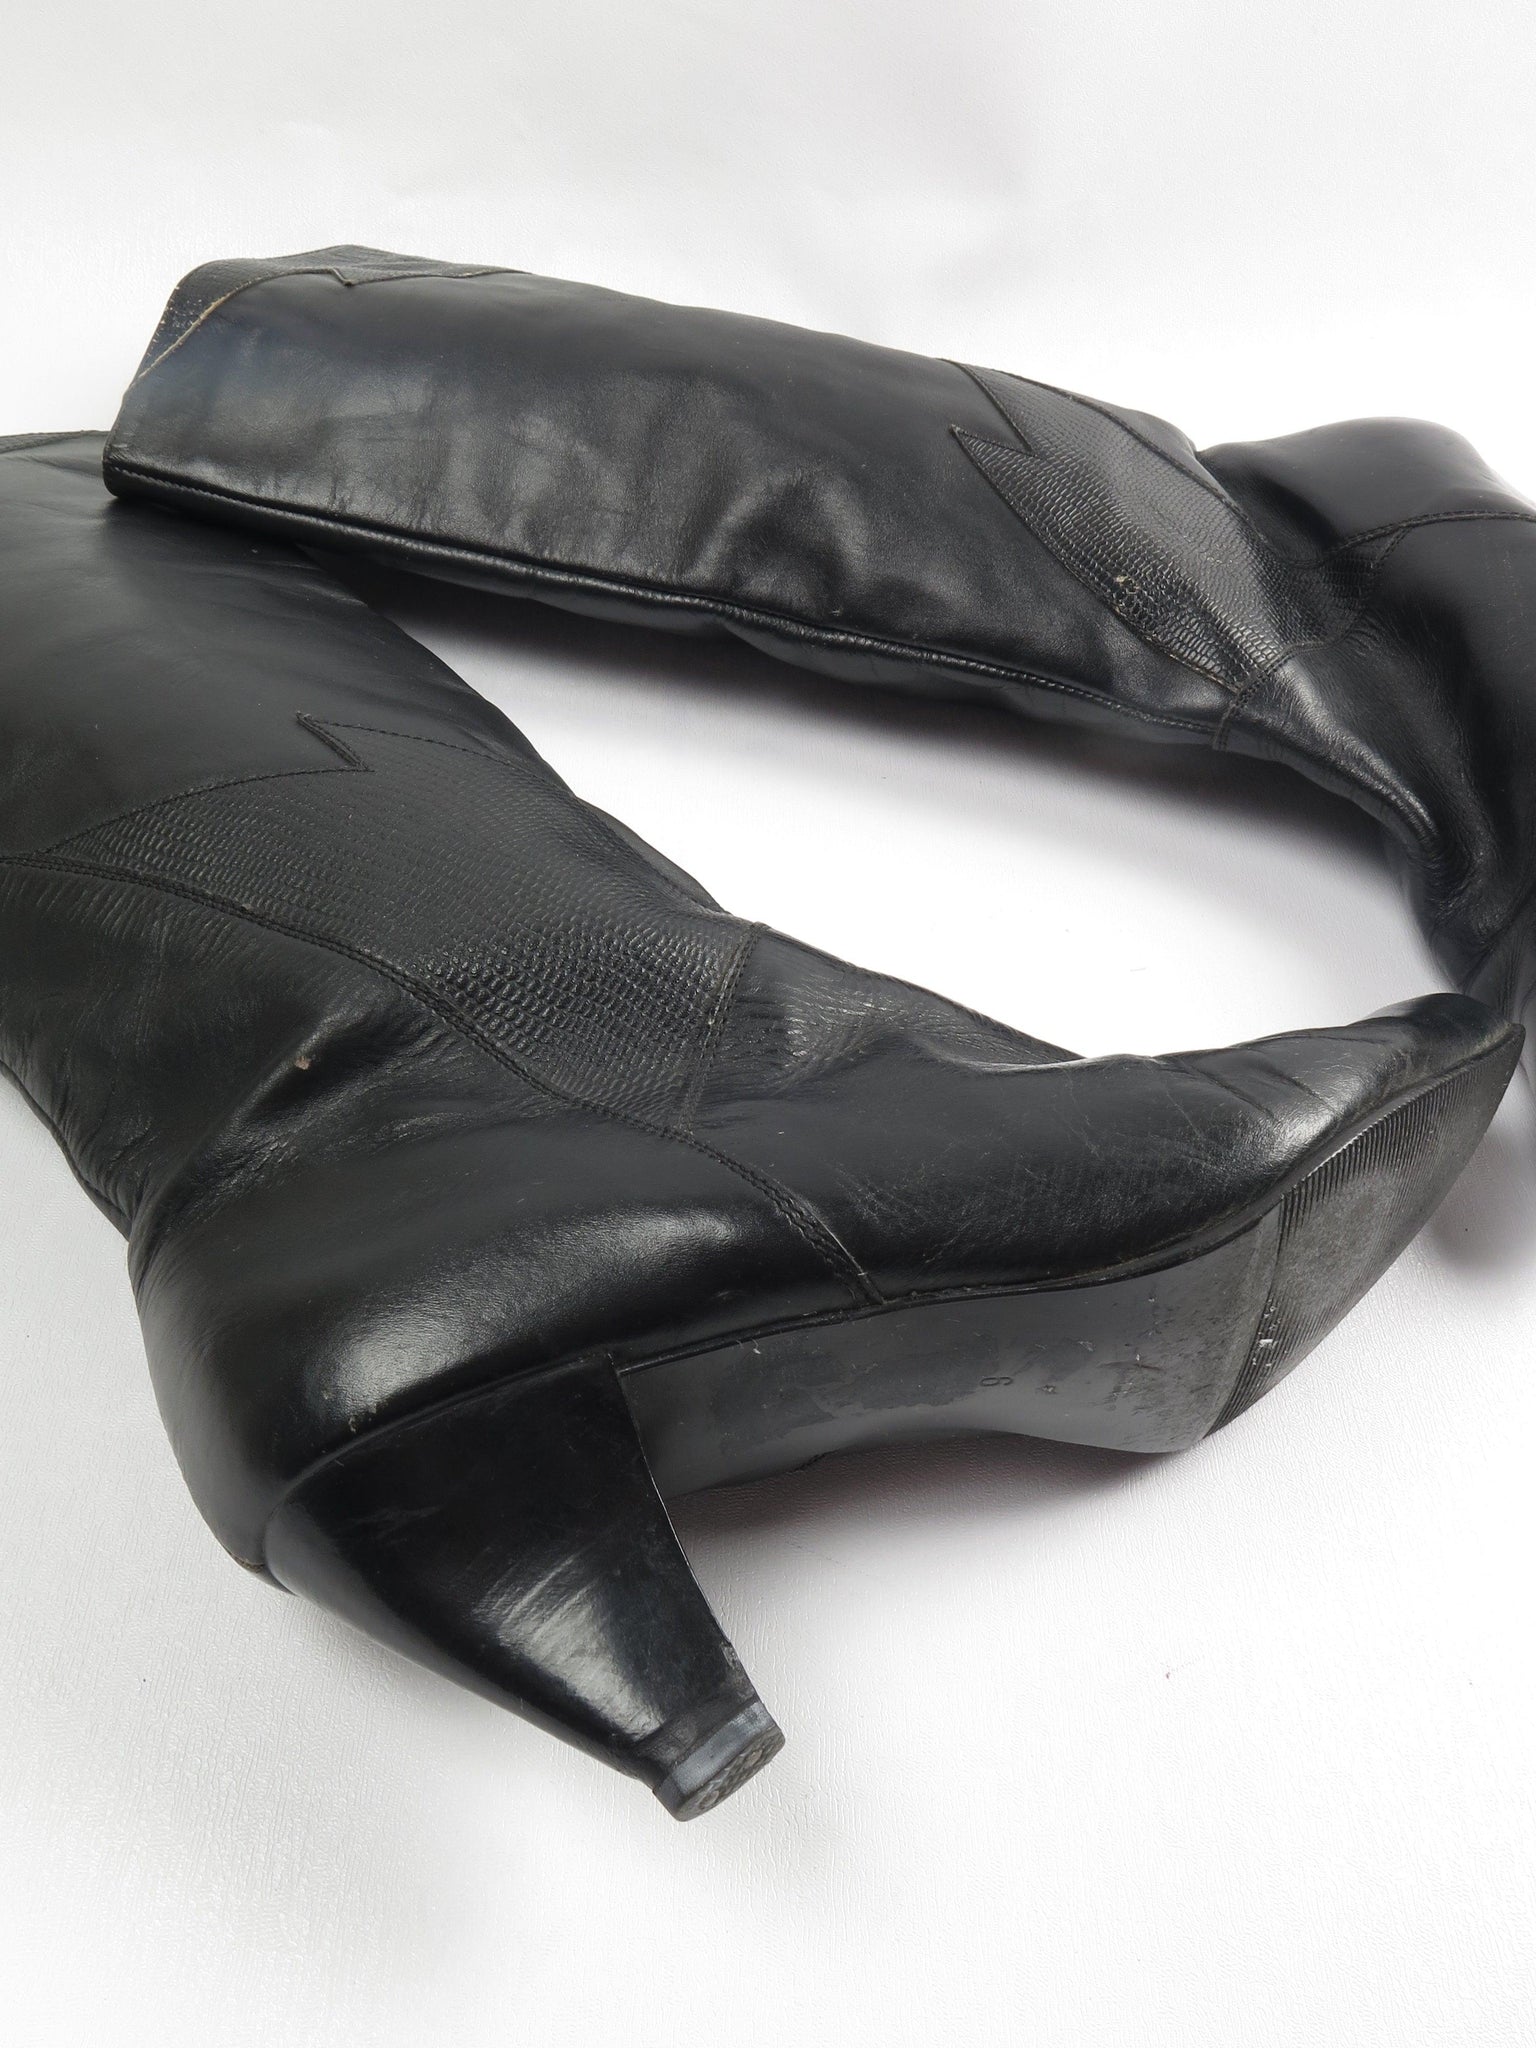 Long Black 1970s Leather Boots 39/6 - The Harlequin